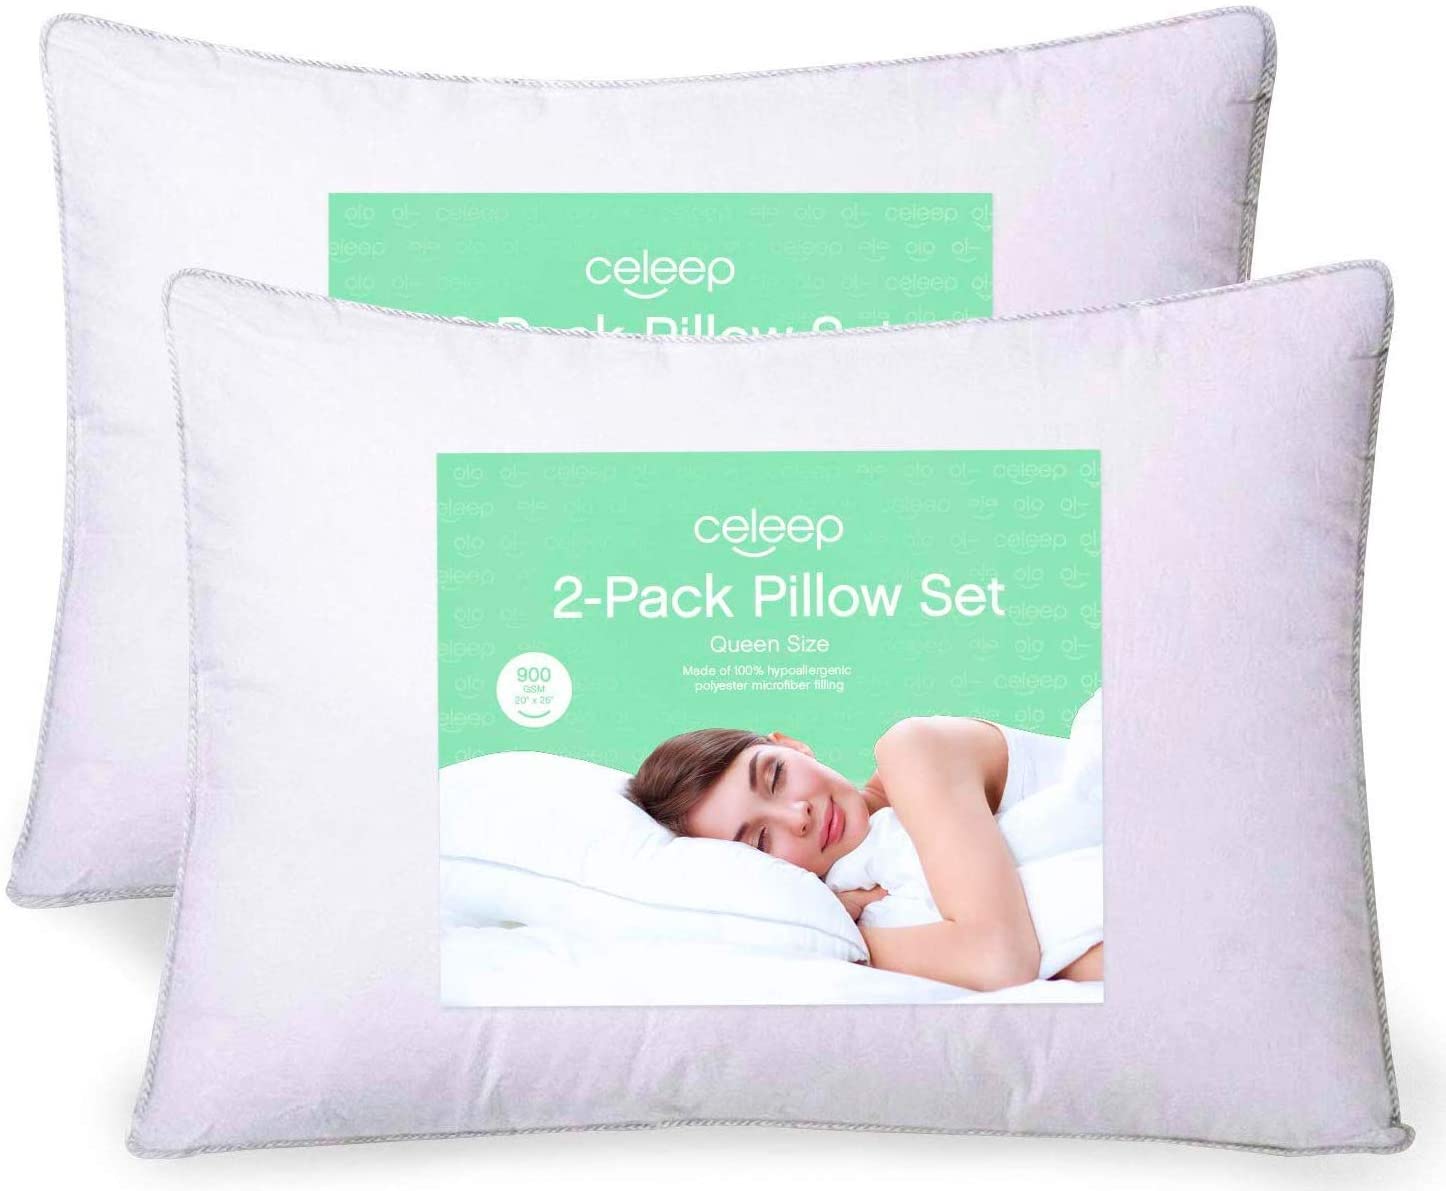 Celeep 2-Pack Queen Bed Pillows for Sleeping - 20 x 26 Inches Pillow - 900GSM